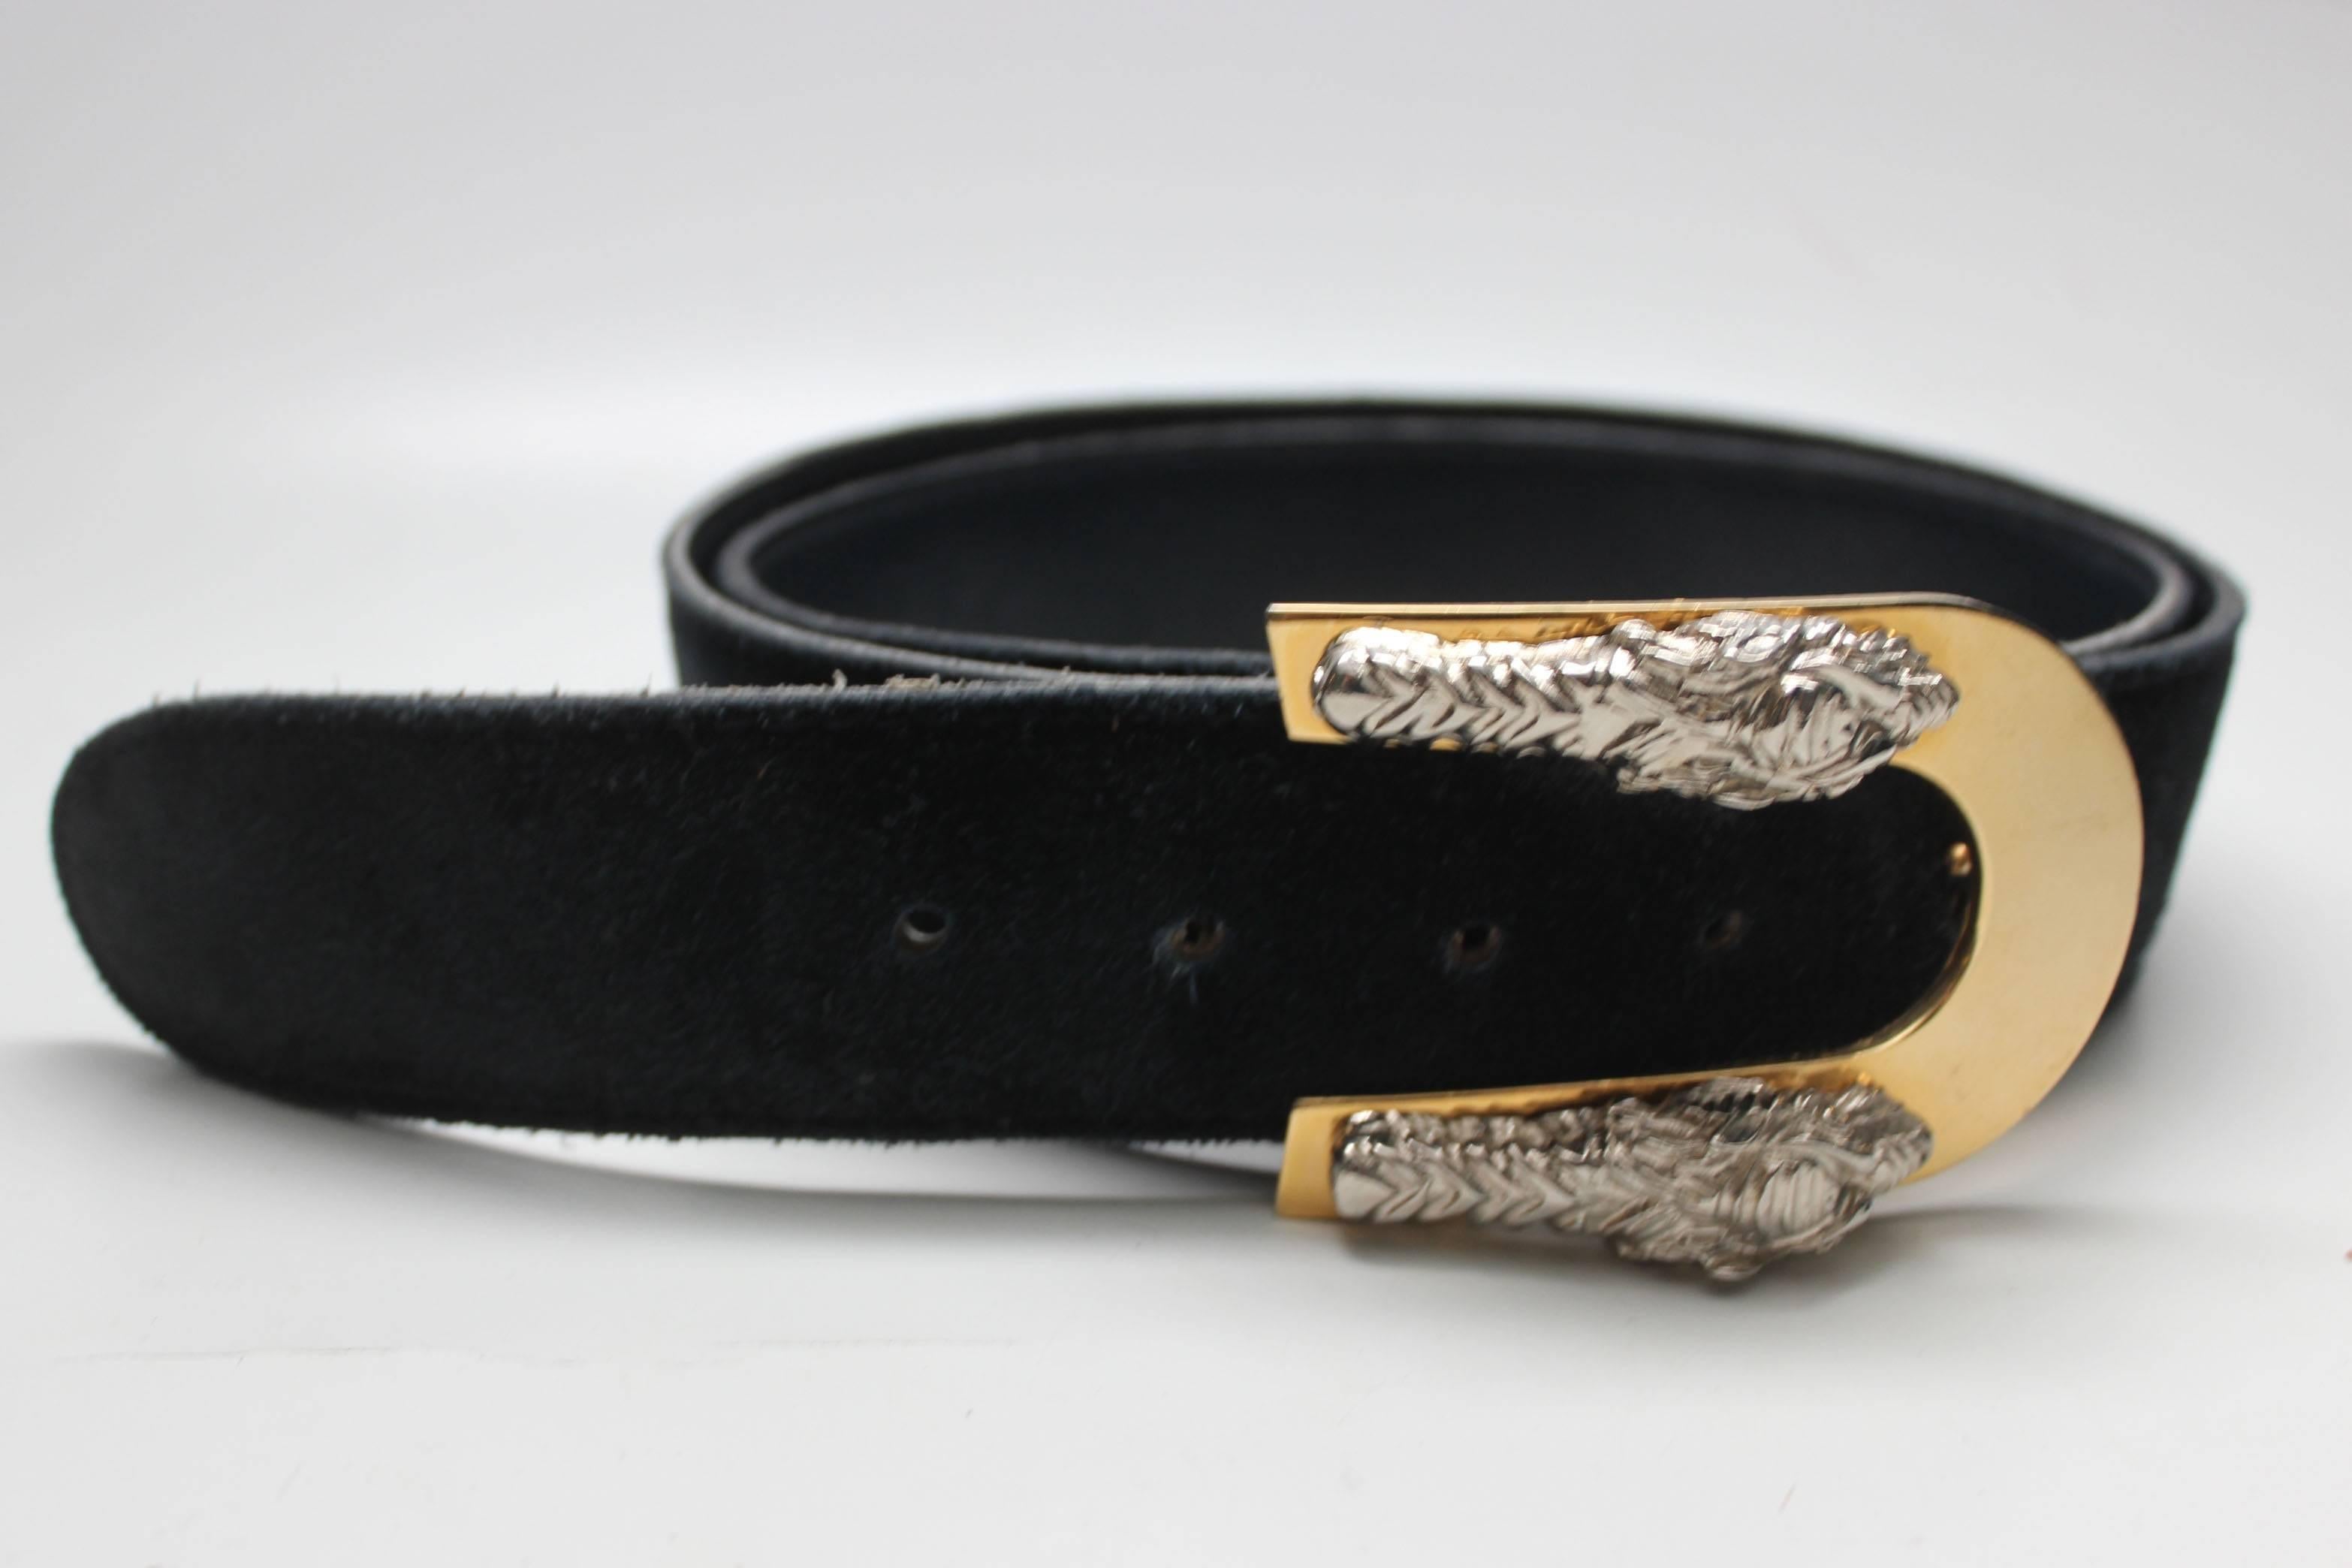 This vintage Jaeger belt makes a bold statement with its gold and silver dragon buckle. The two silver colored dragon faces sit on a gold buckle with a hook on the back. The navy belt is suede on the outside and leather inside, marked as size 34,